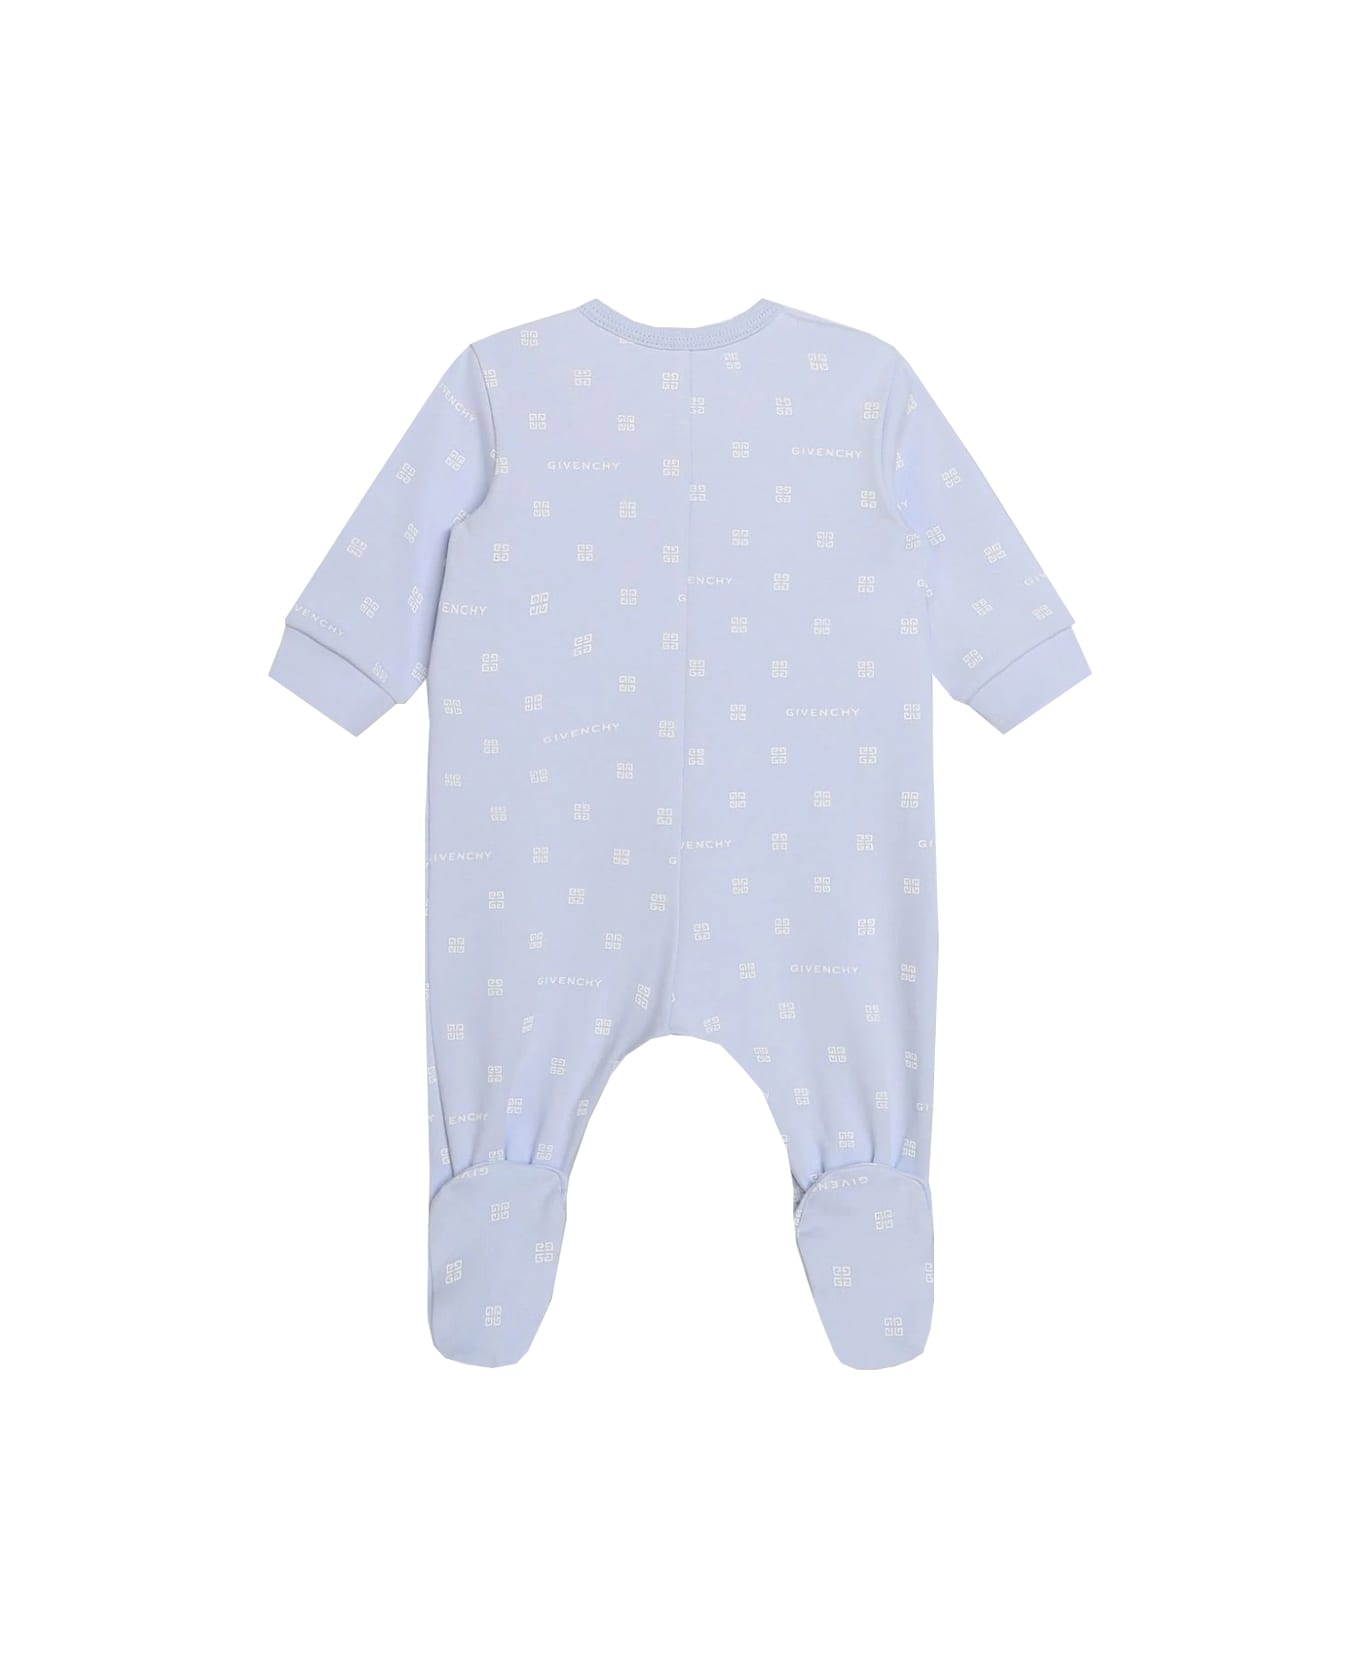 Givenchy Romper With Print - Light blue